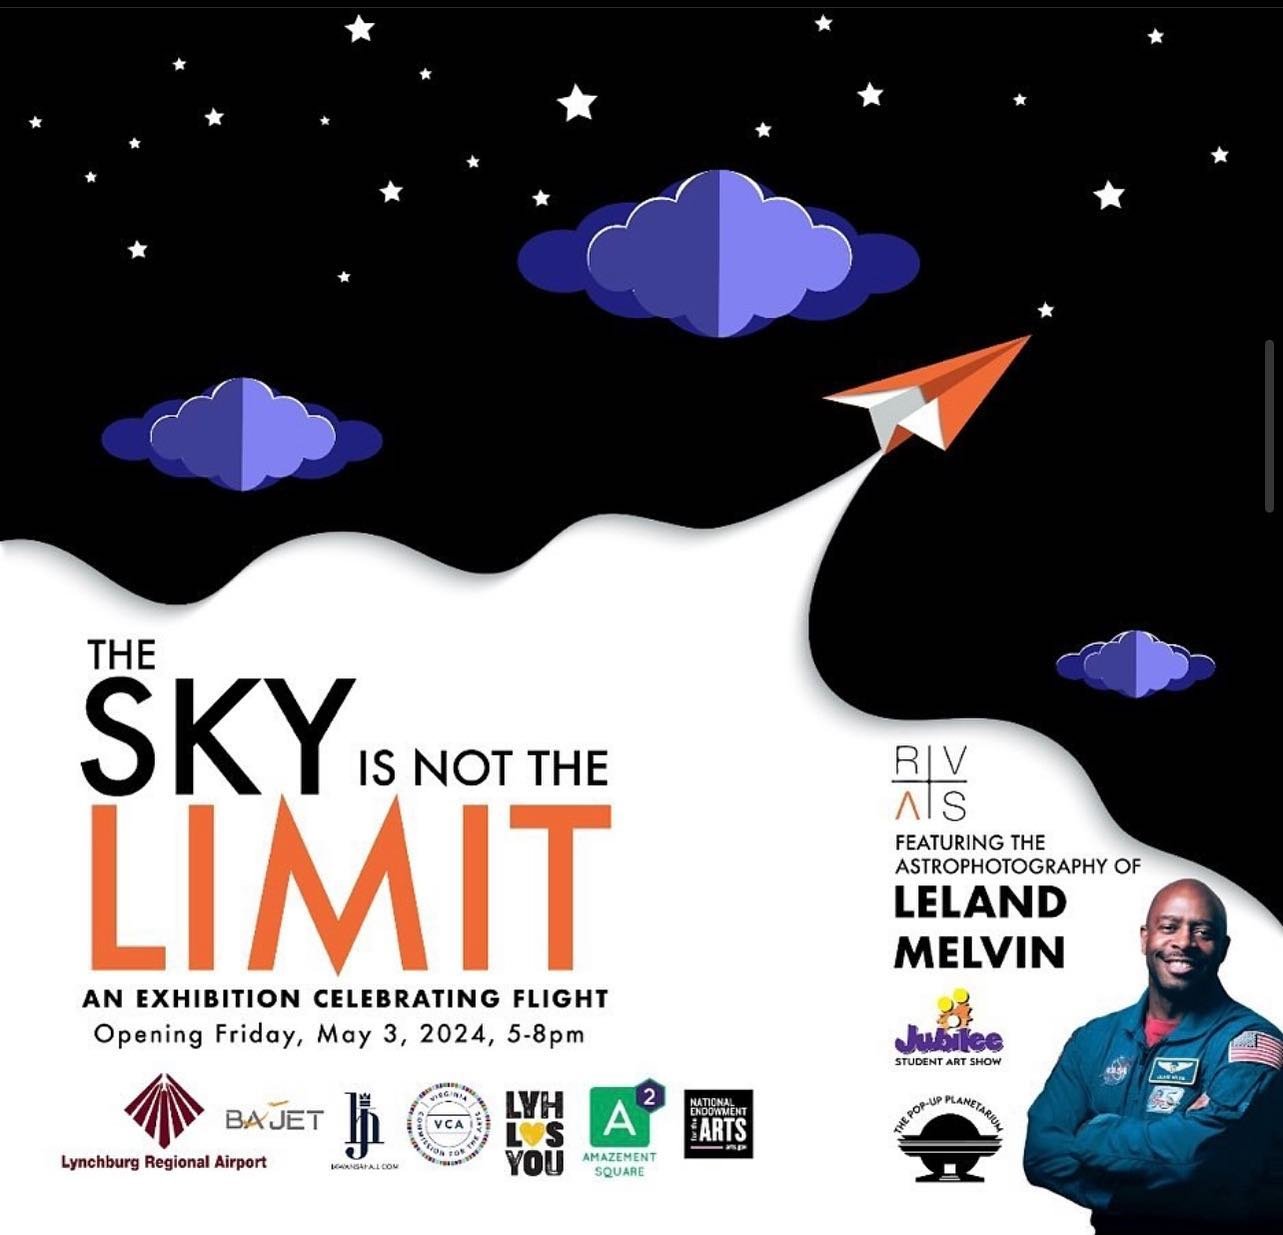 Come hang out with us and our traveling planetarium tonight at The Sky Is Not The Limit exhibition at Riverviews Artspace from 5-8pm!